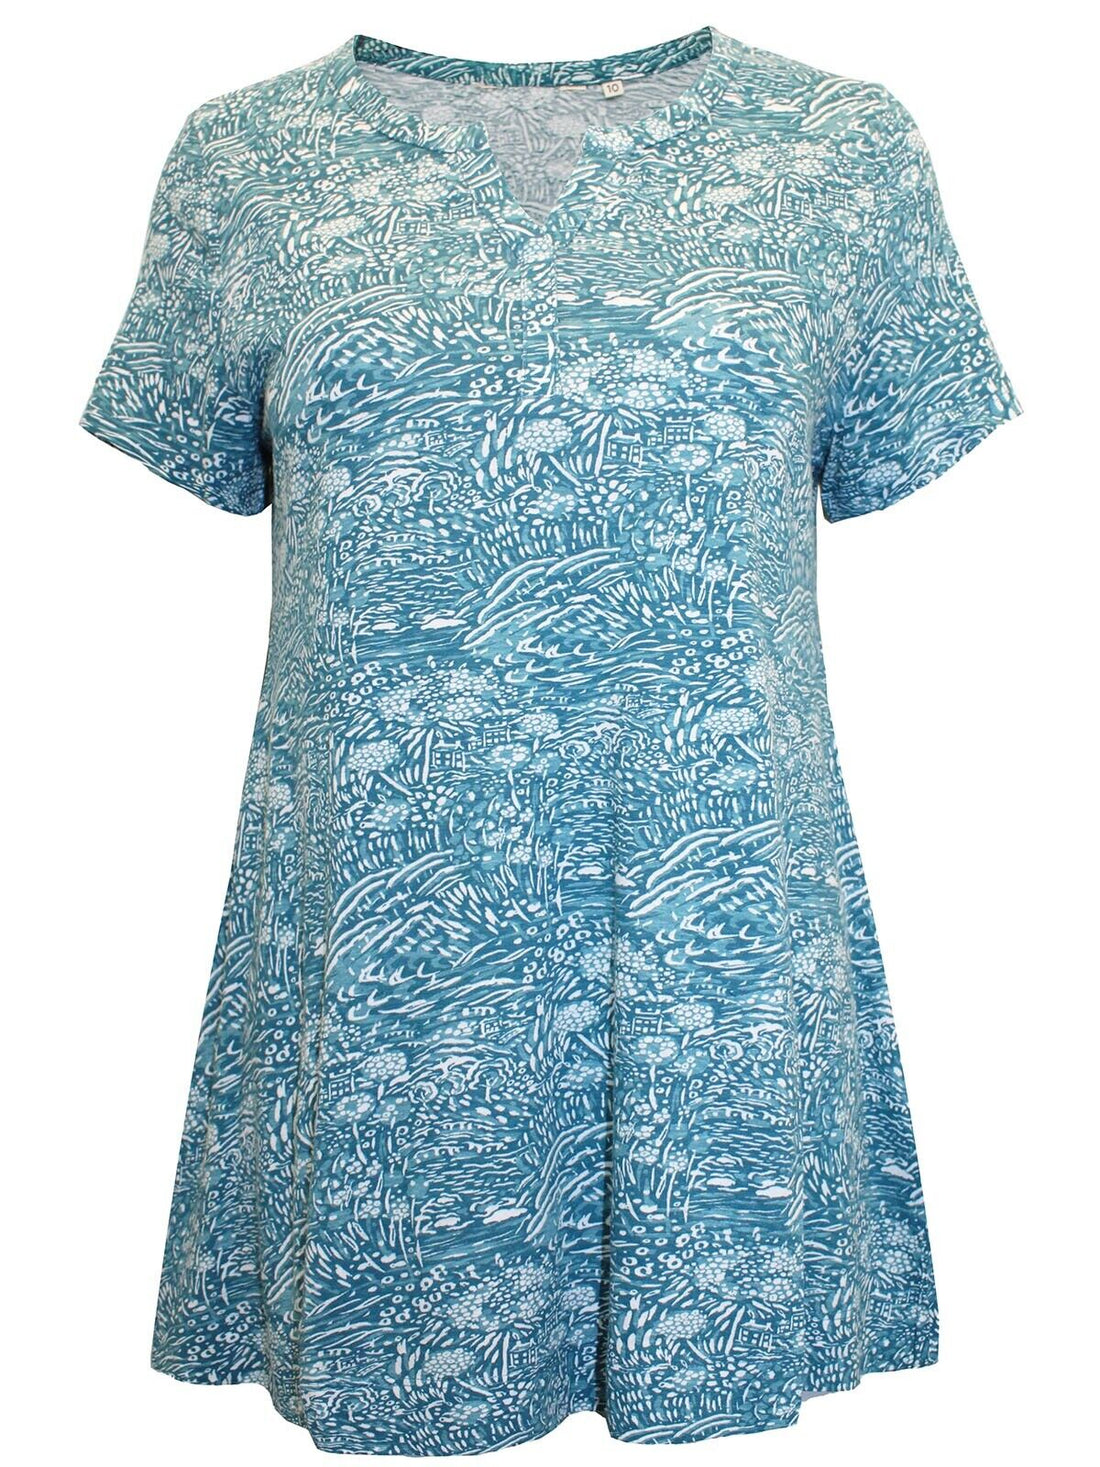 EX Seasalt Turquoise Penwith Landscape Gouache Risso Jersey Top in Sizes 10-28